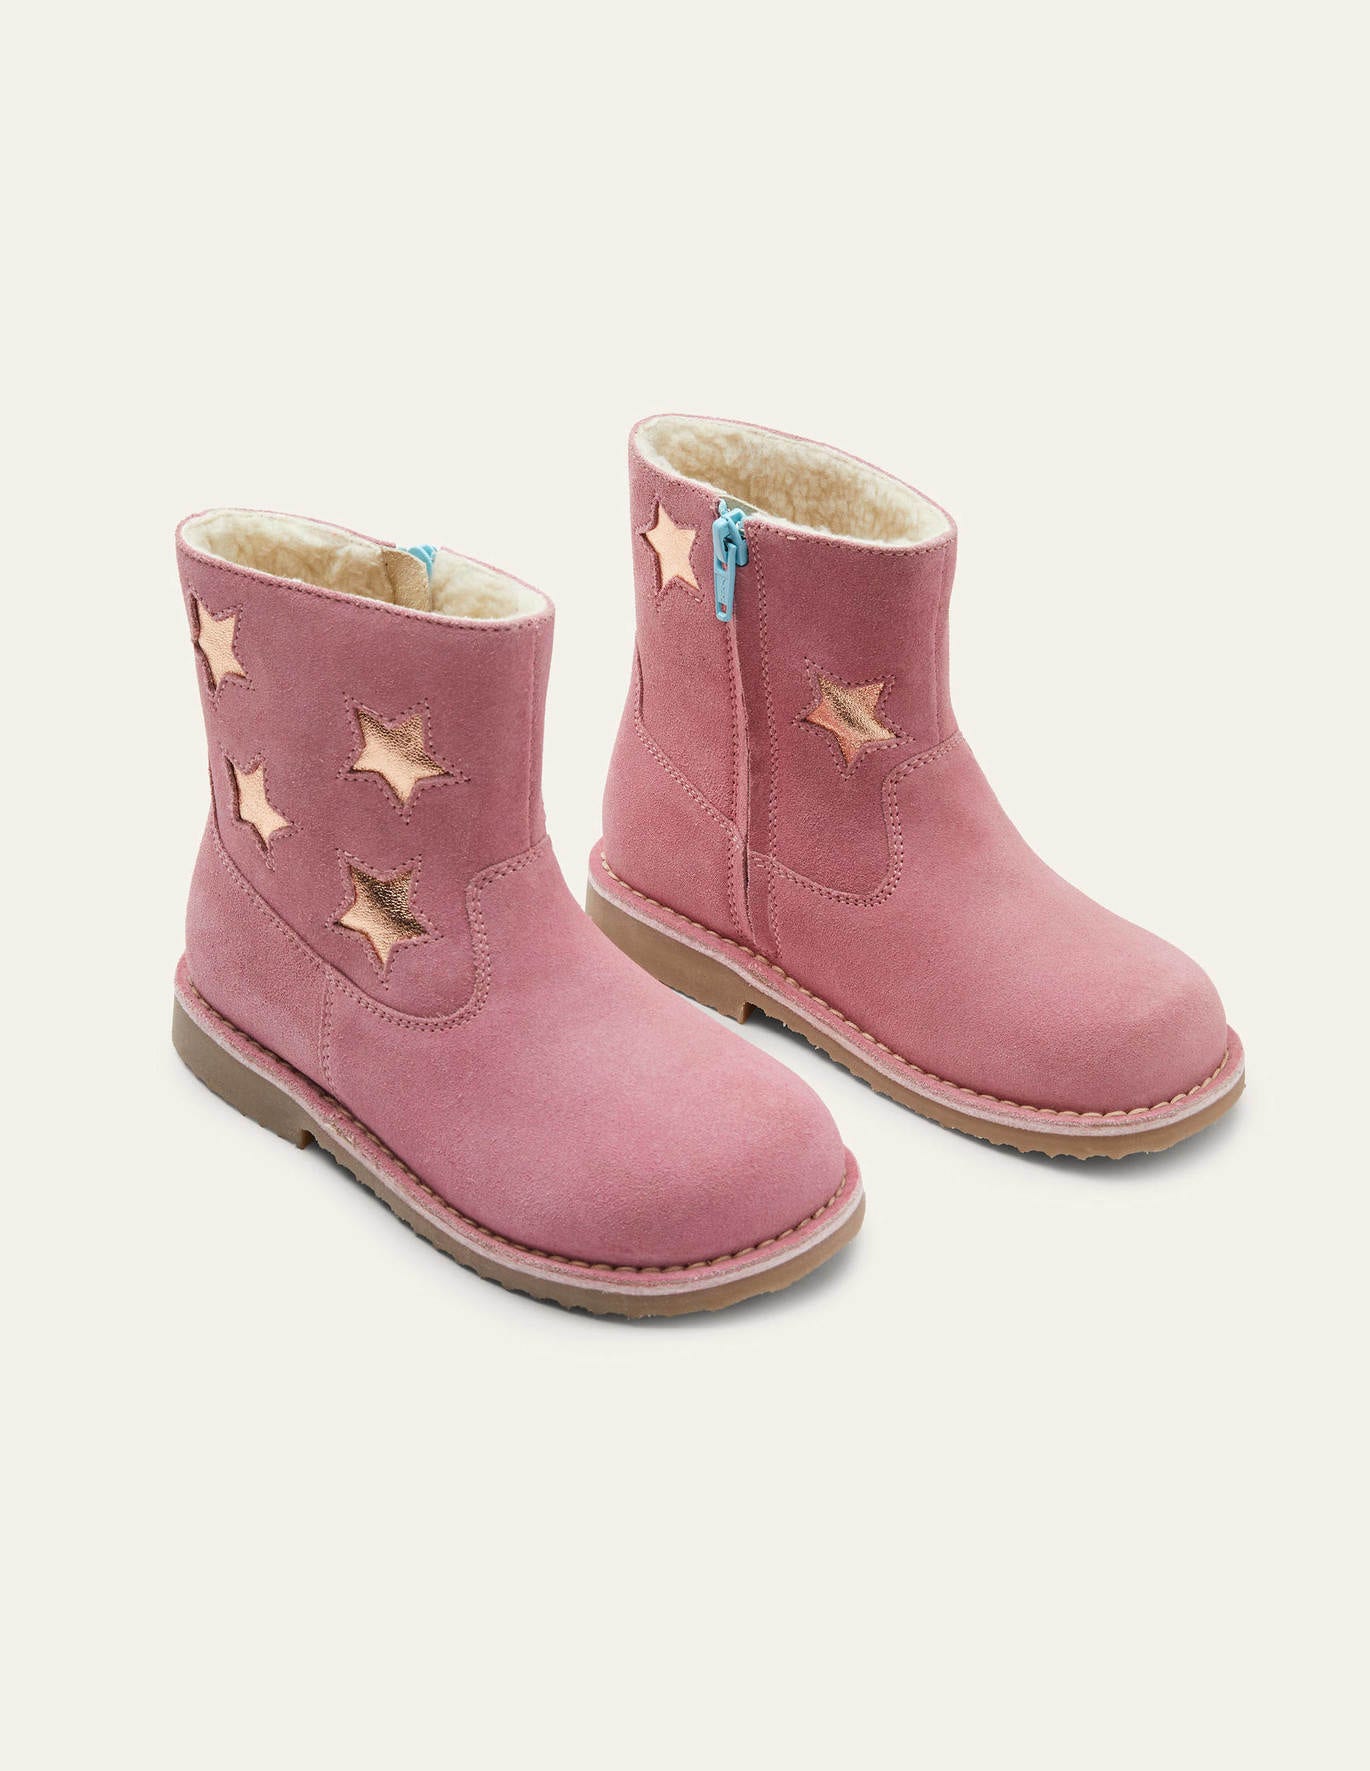 Boden Cosy Short Leather Boots - Formica Pink Stars